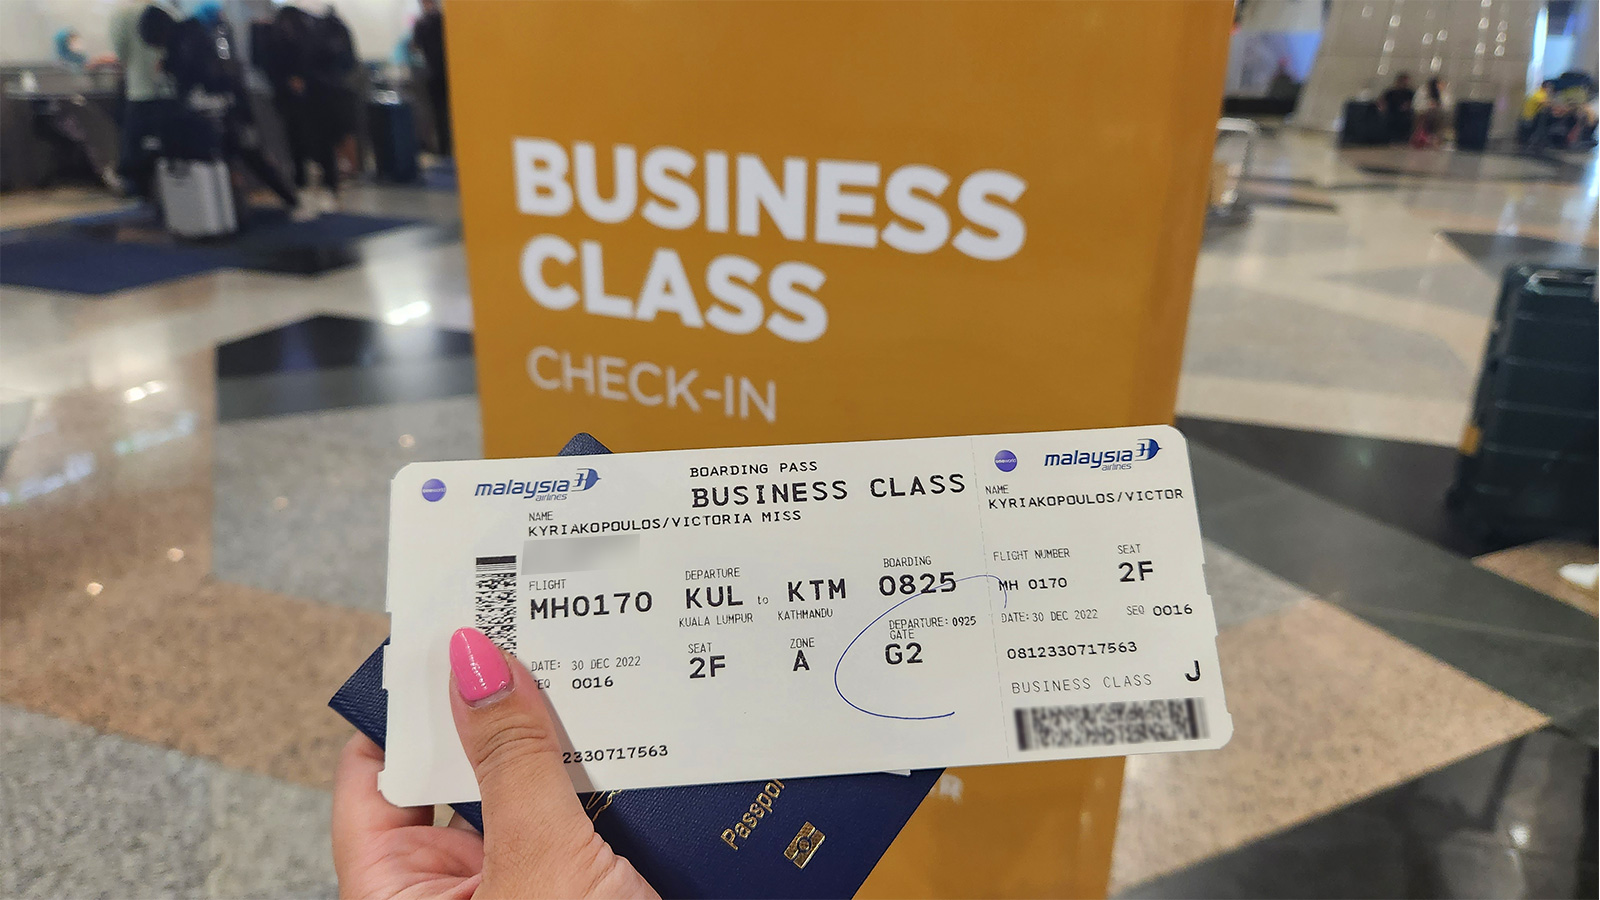 Business Class check in from KUL-KTM